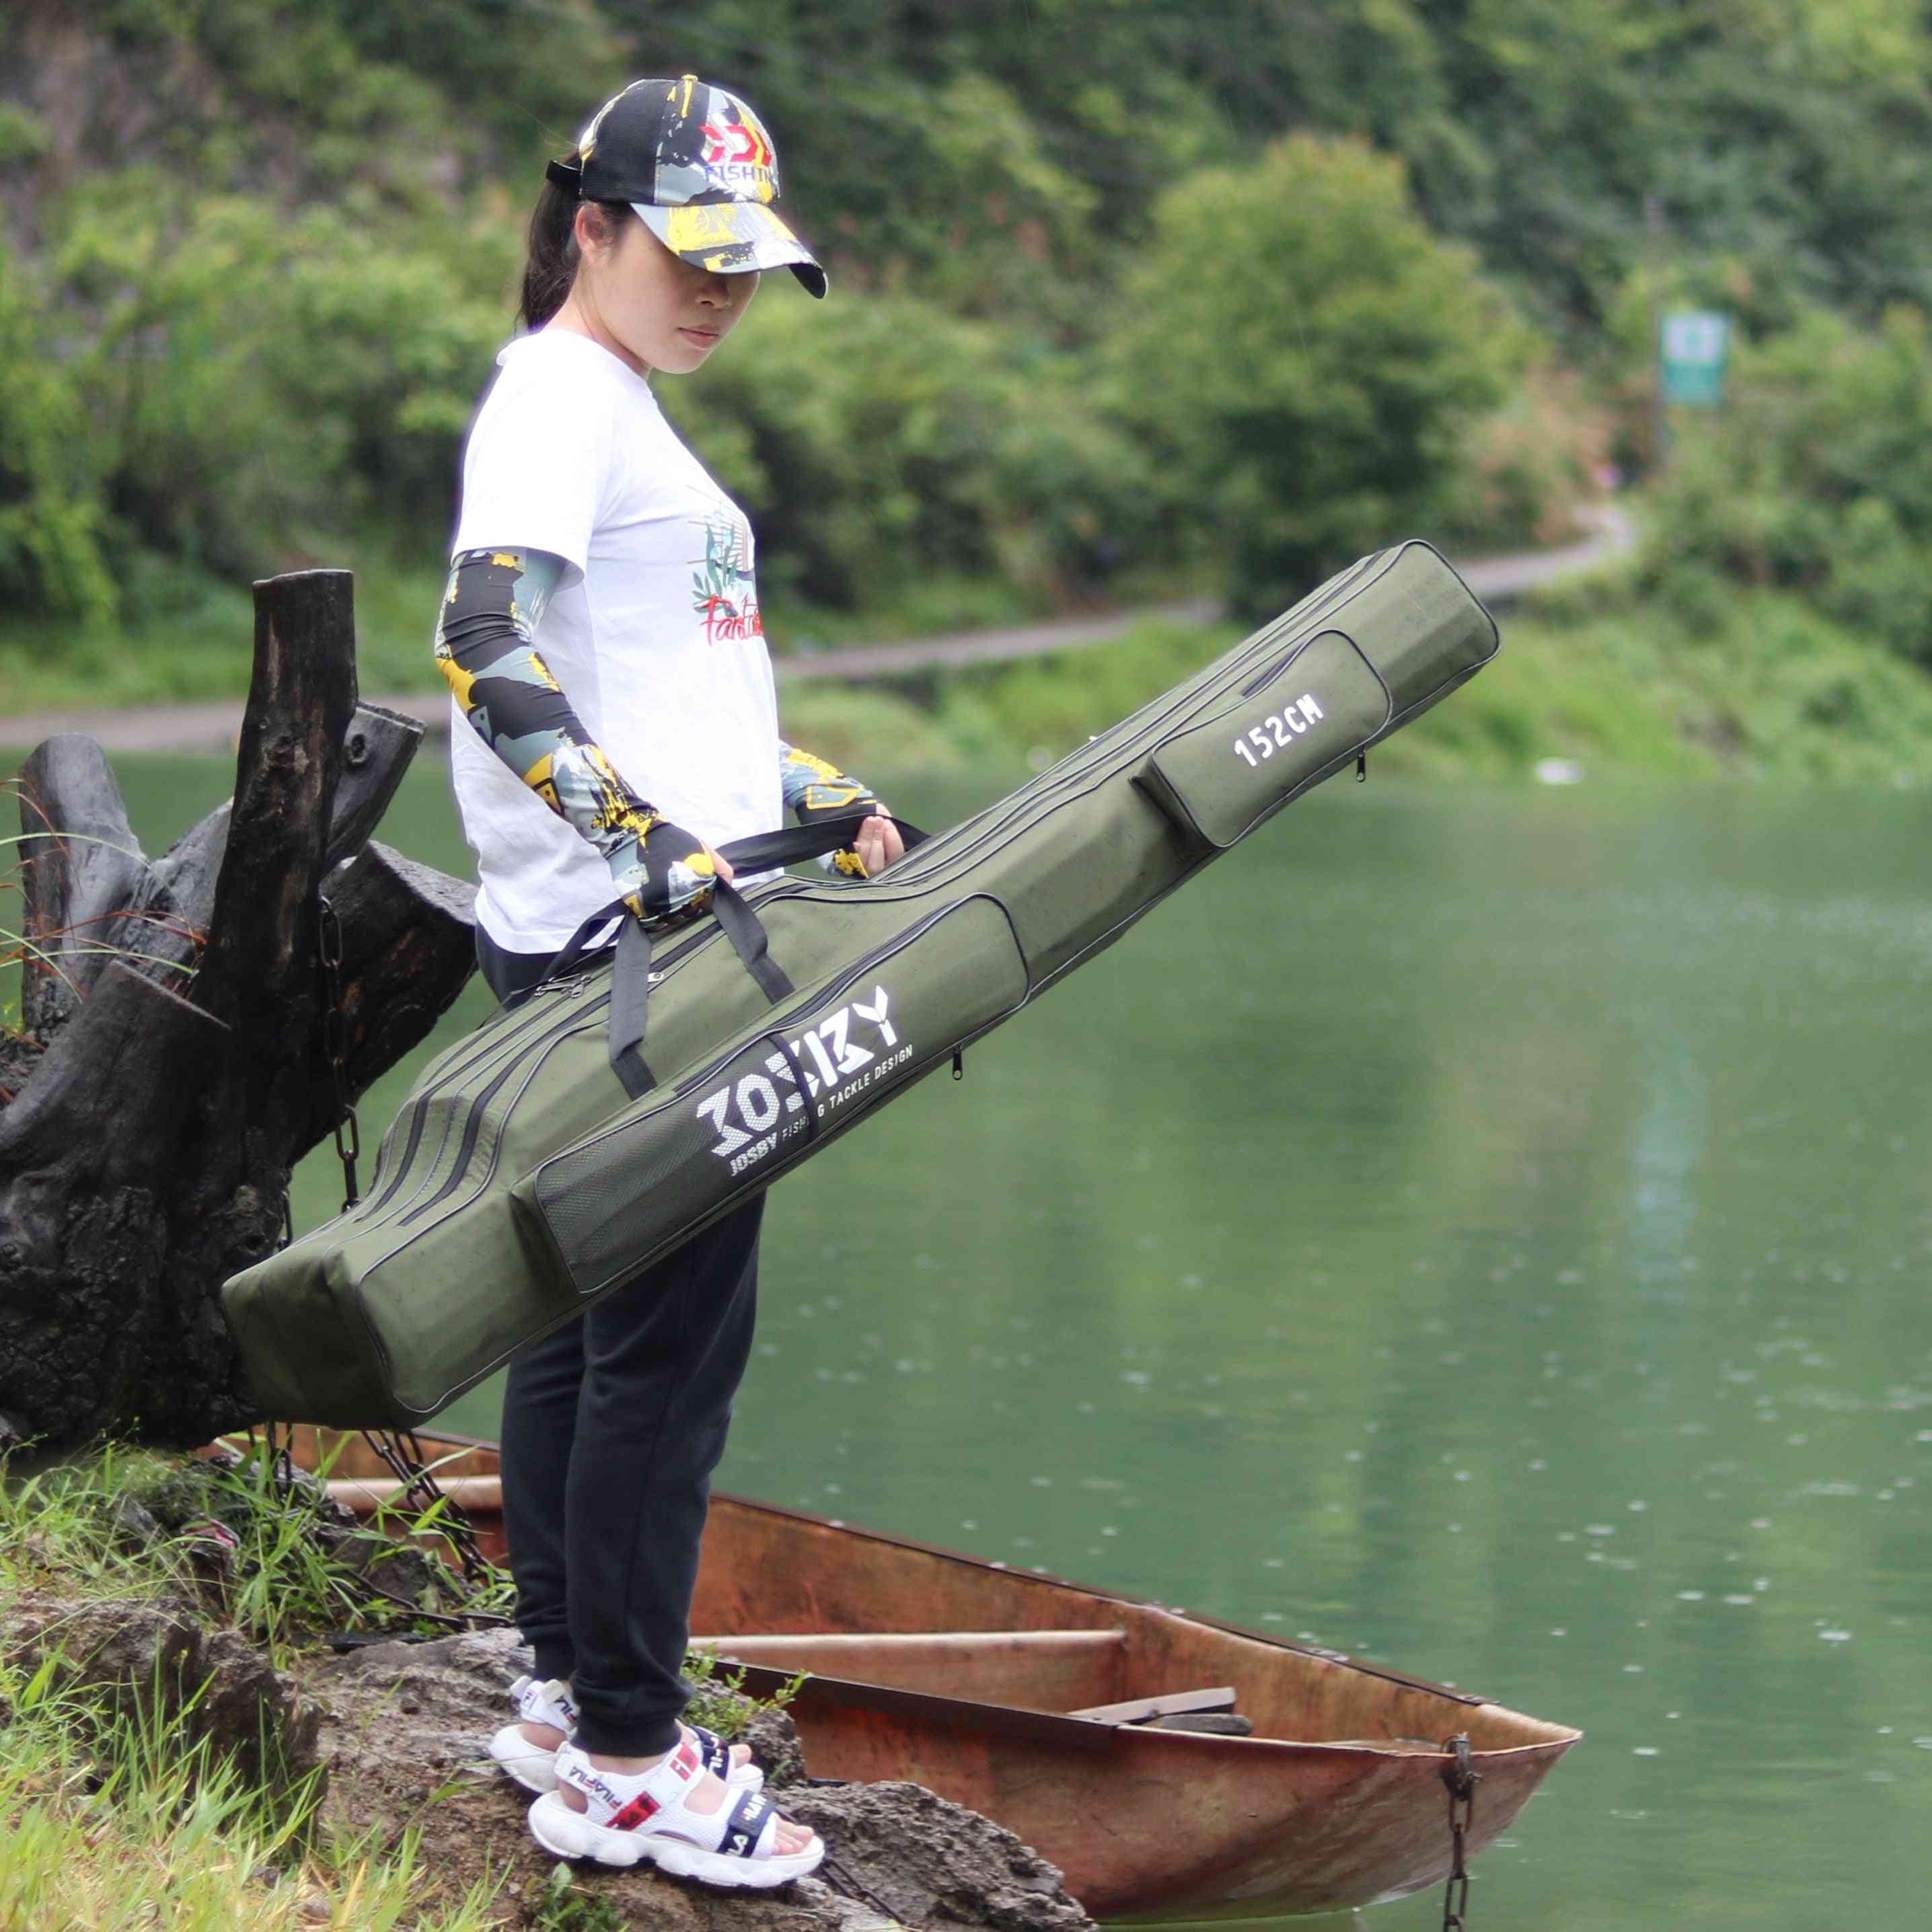 Portable Foldable Fishing Rod Carrier Fish Pole Tools, Storage Bag / Case